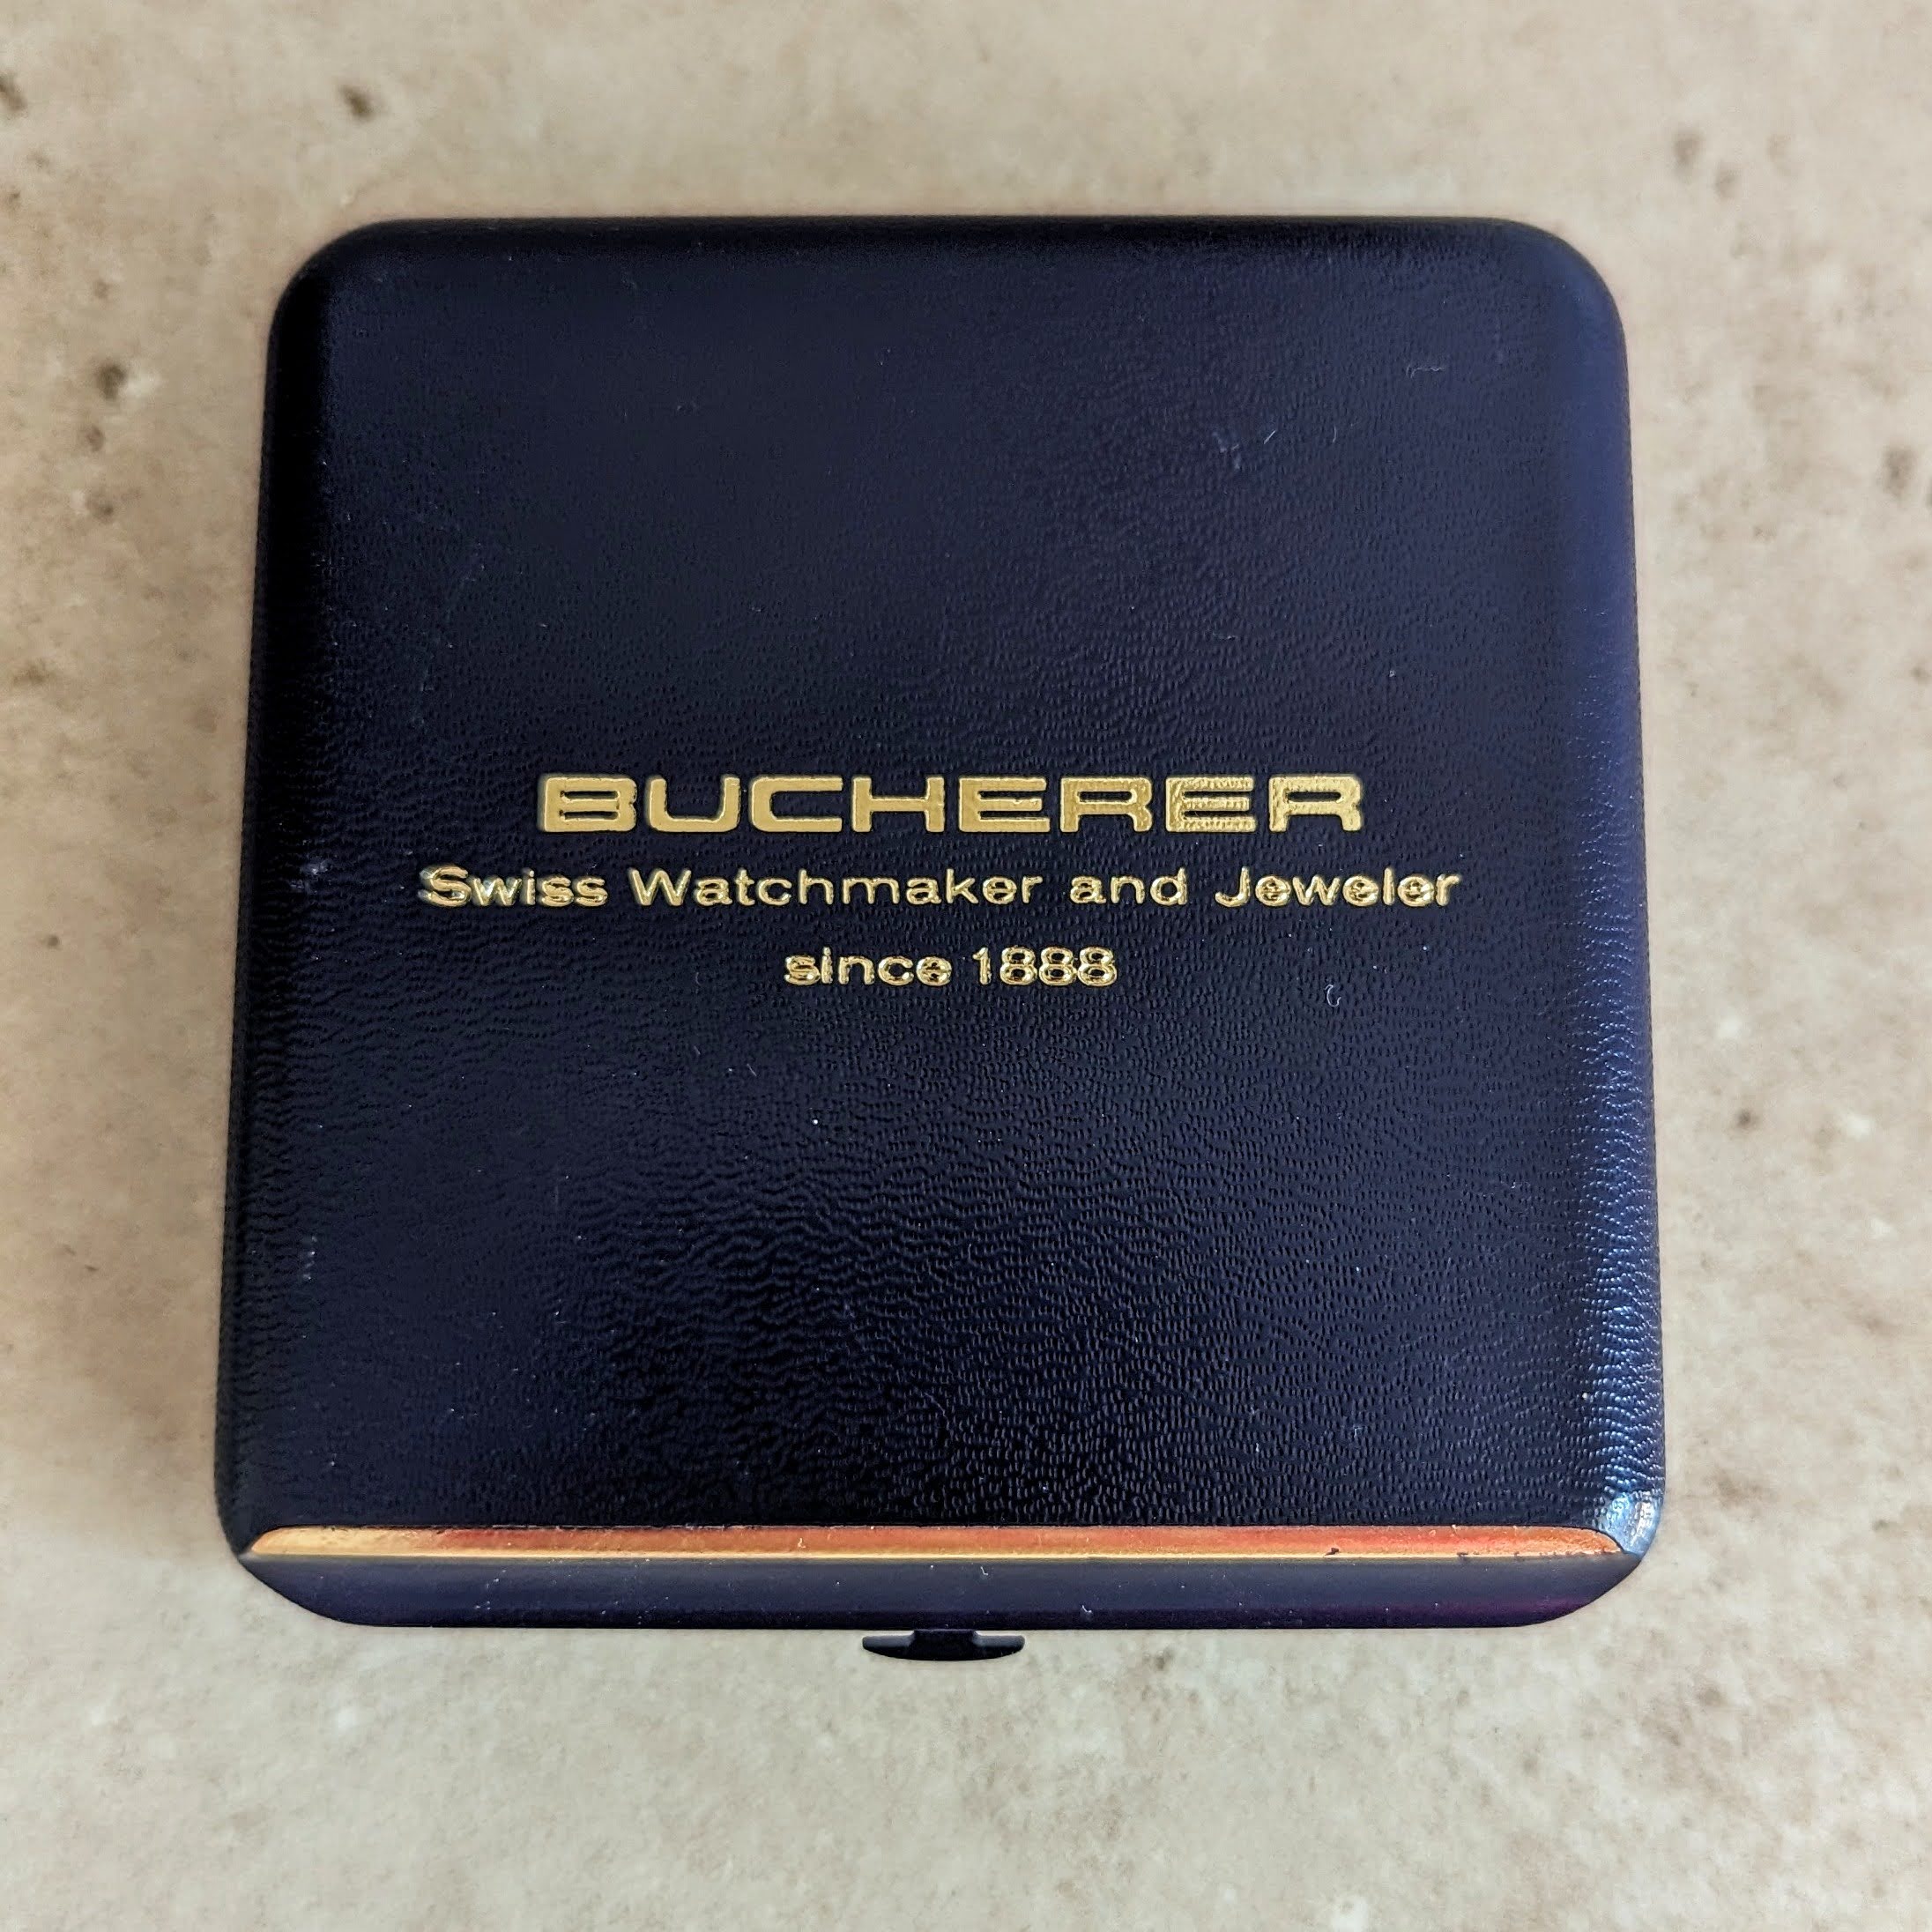 Vintage BUCHERER Clock-Ligther Swiss Made Mechanical Watch 17 Jewels – In BOX!